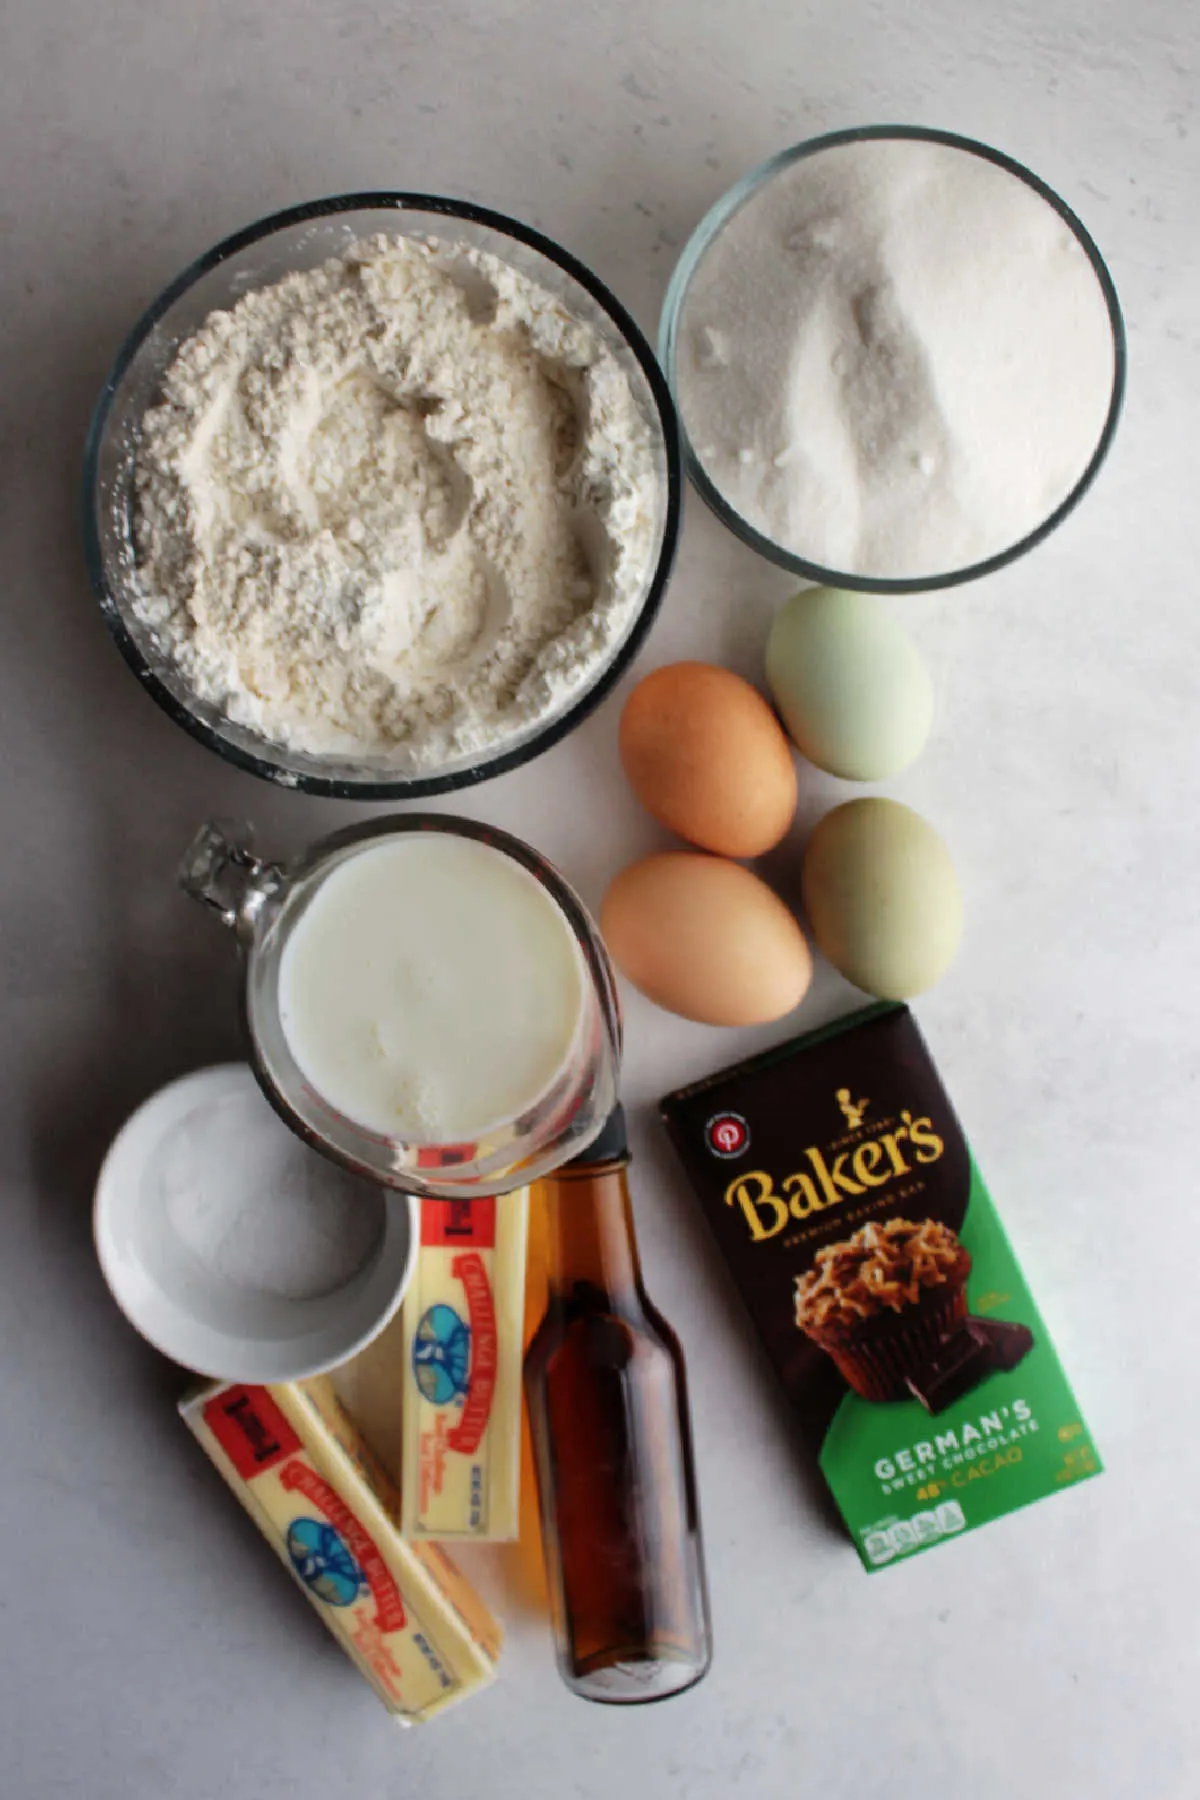 Ingredients including German chocolate, butter, vanilla, buttermilk, eggs, flour, sugar, salt and baking soda ready to be made into German chocolate cake batter.